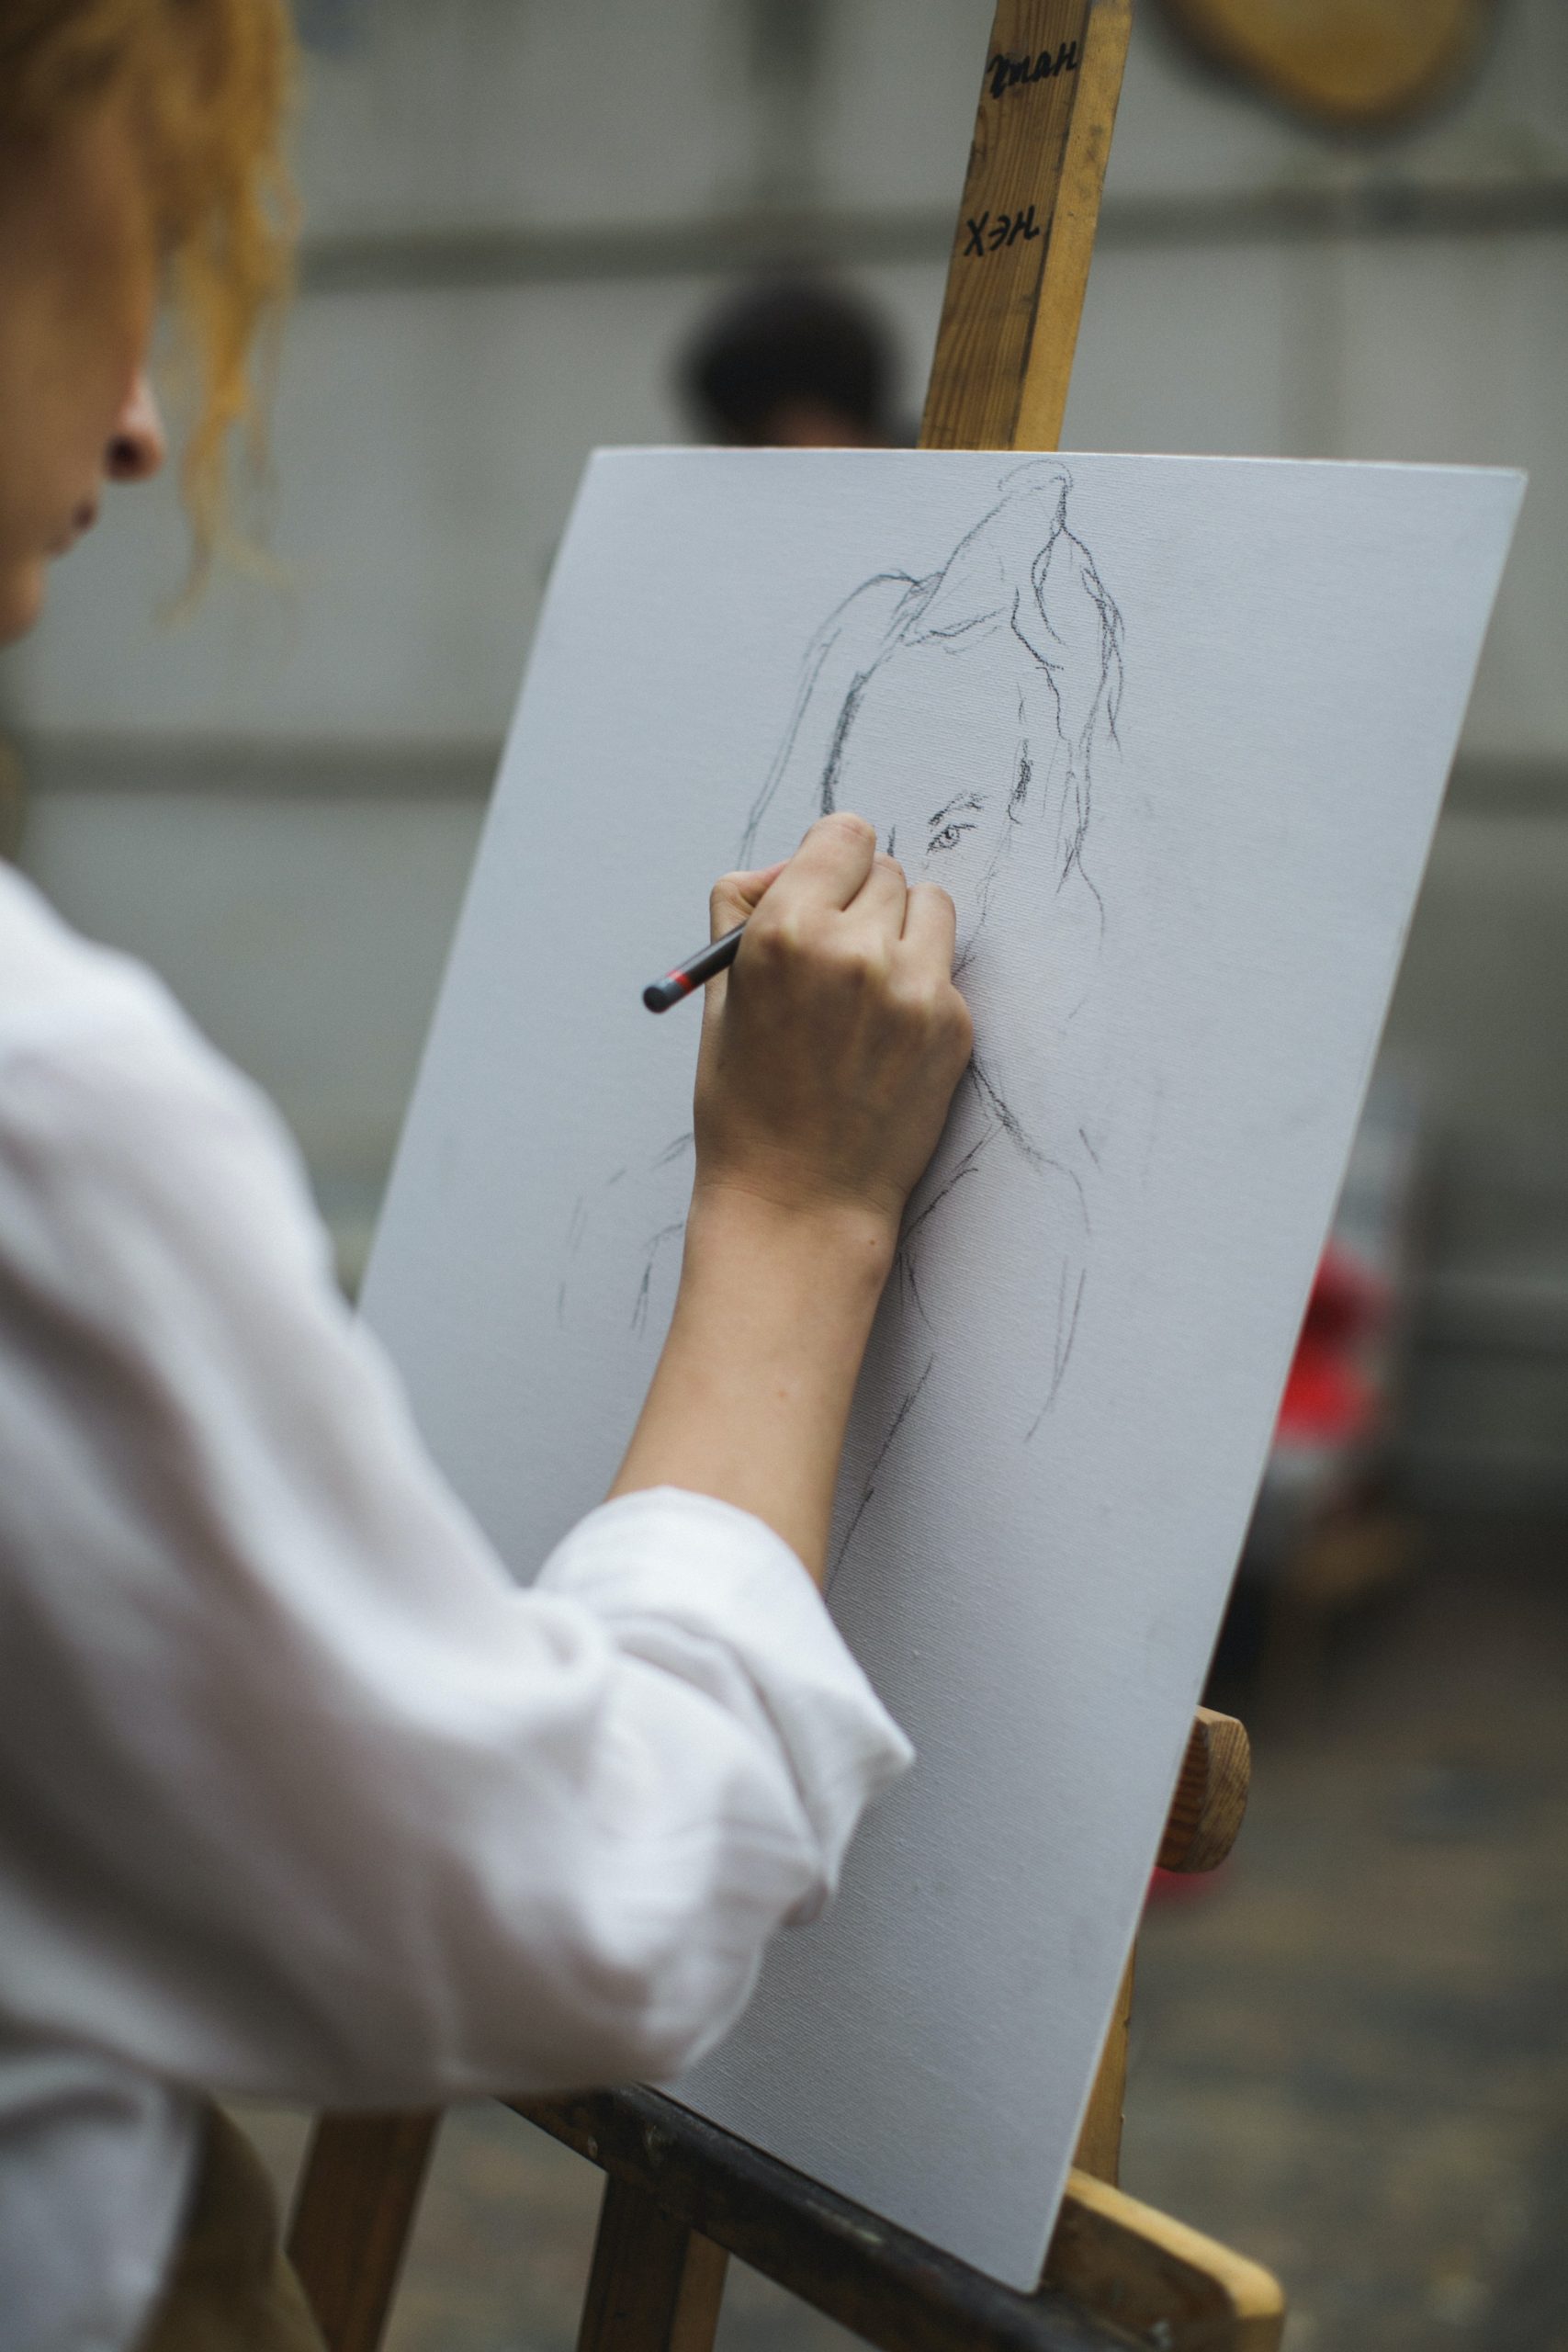 Life Drawing Class – hosted by local illustrator Rikki Marr